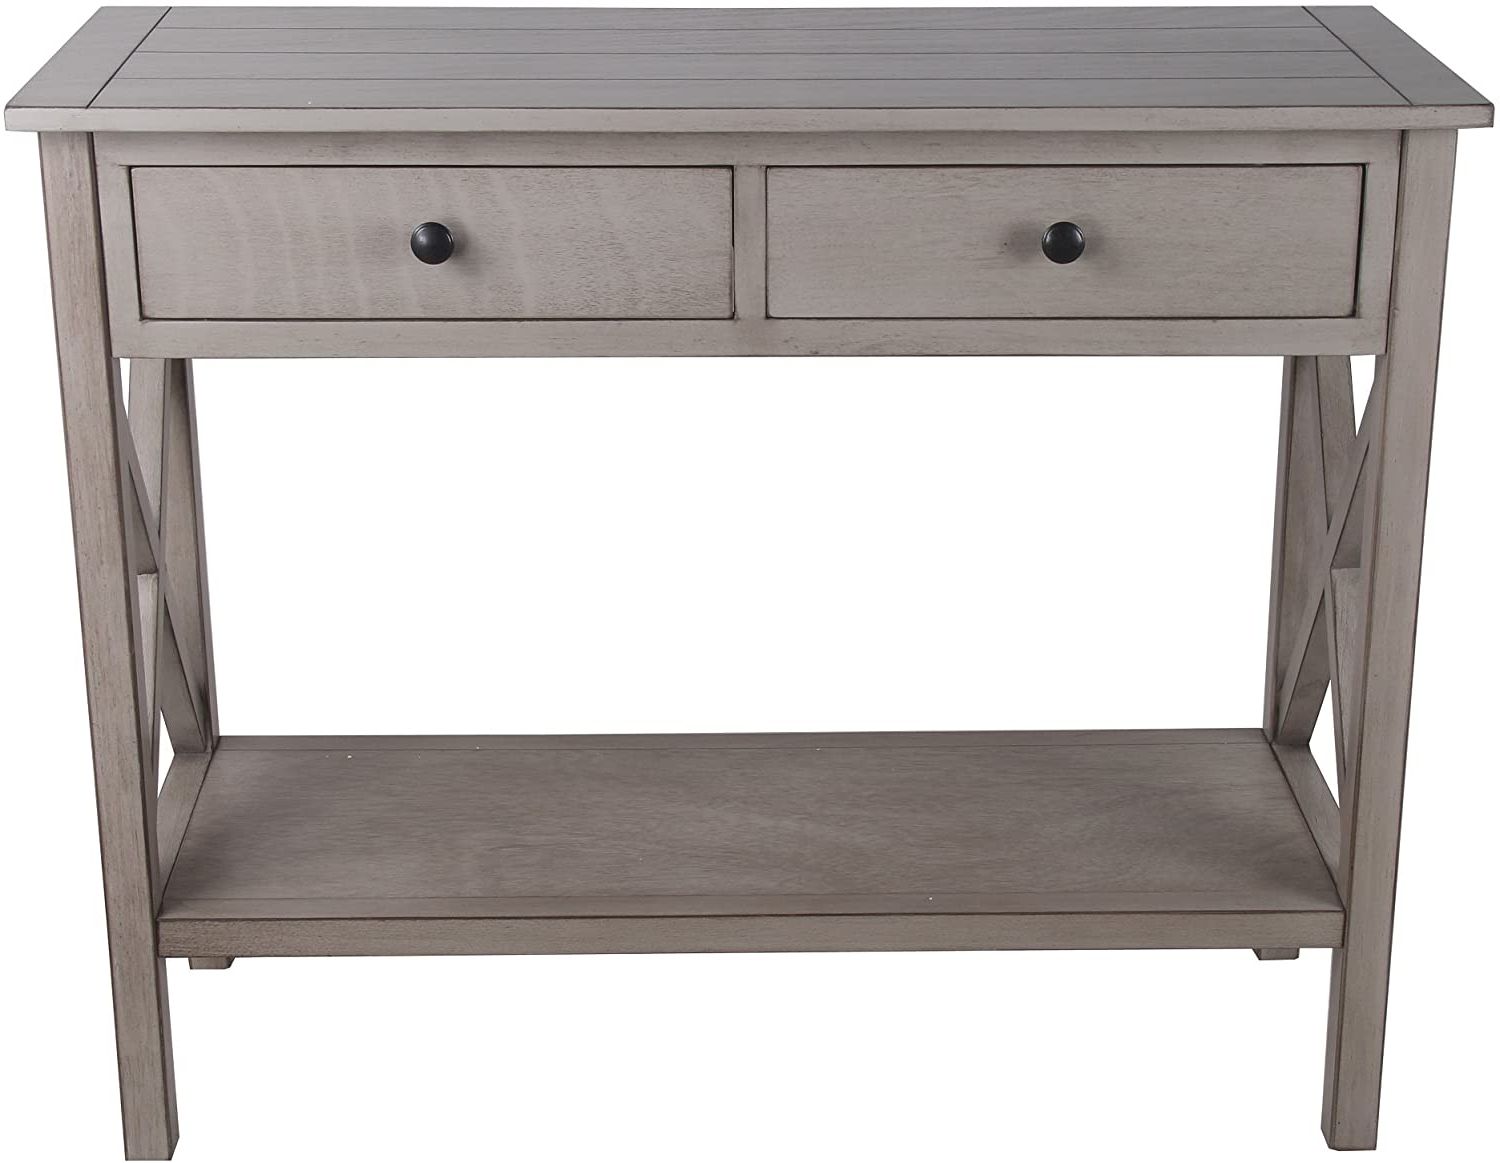 2 Drawer Console Tables Inside Well Known Amazon: Privilege Oyster 2 Drawer Console Table (View 10 of 10)